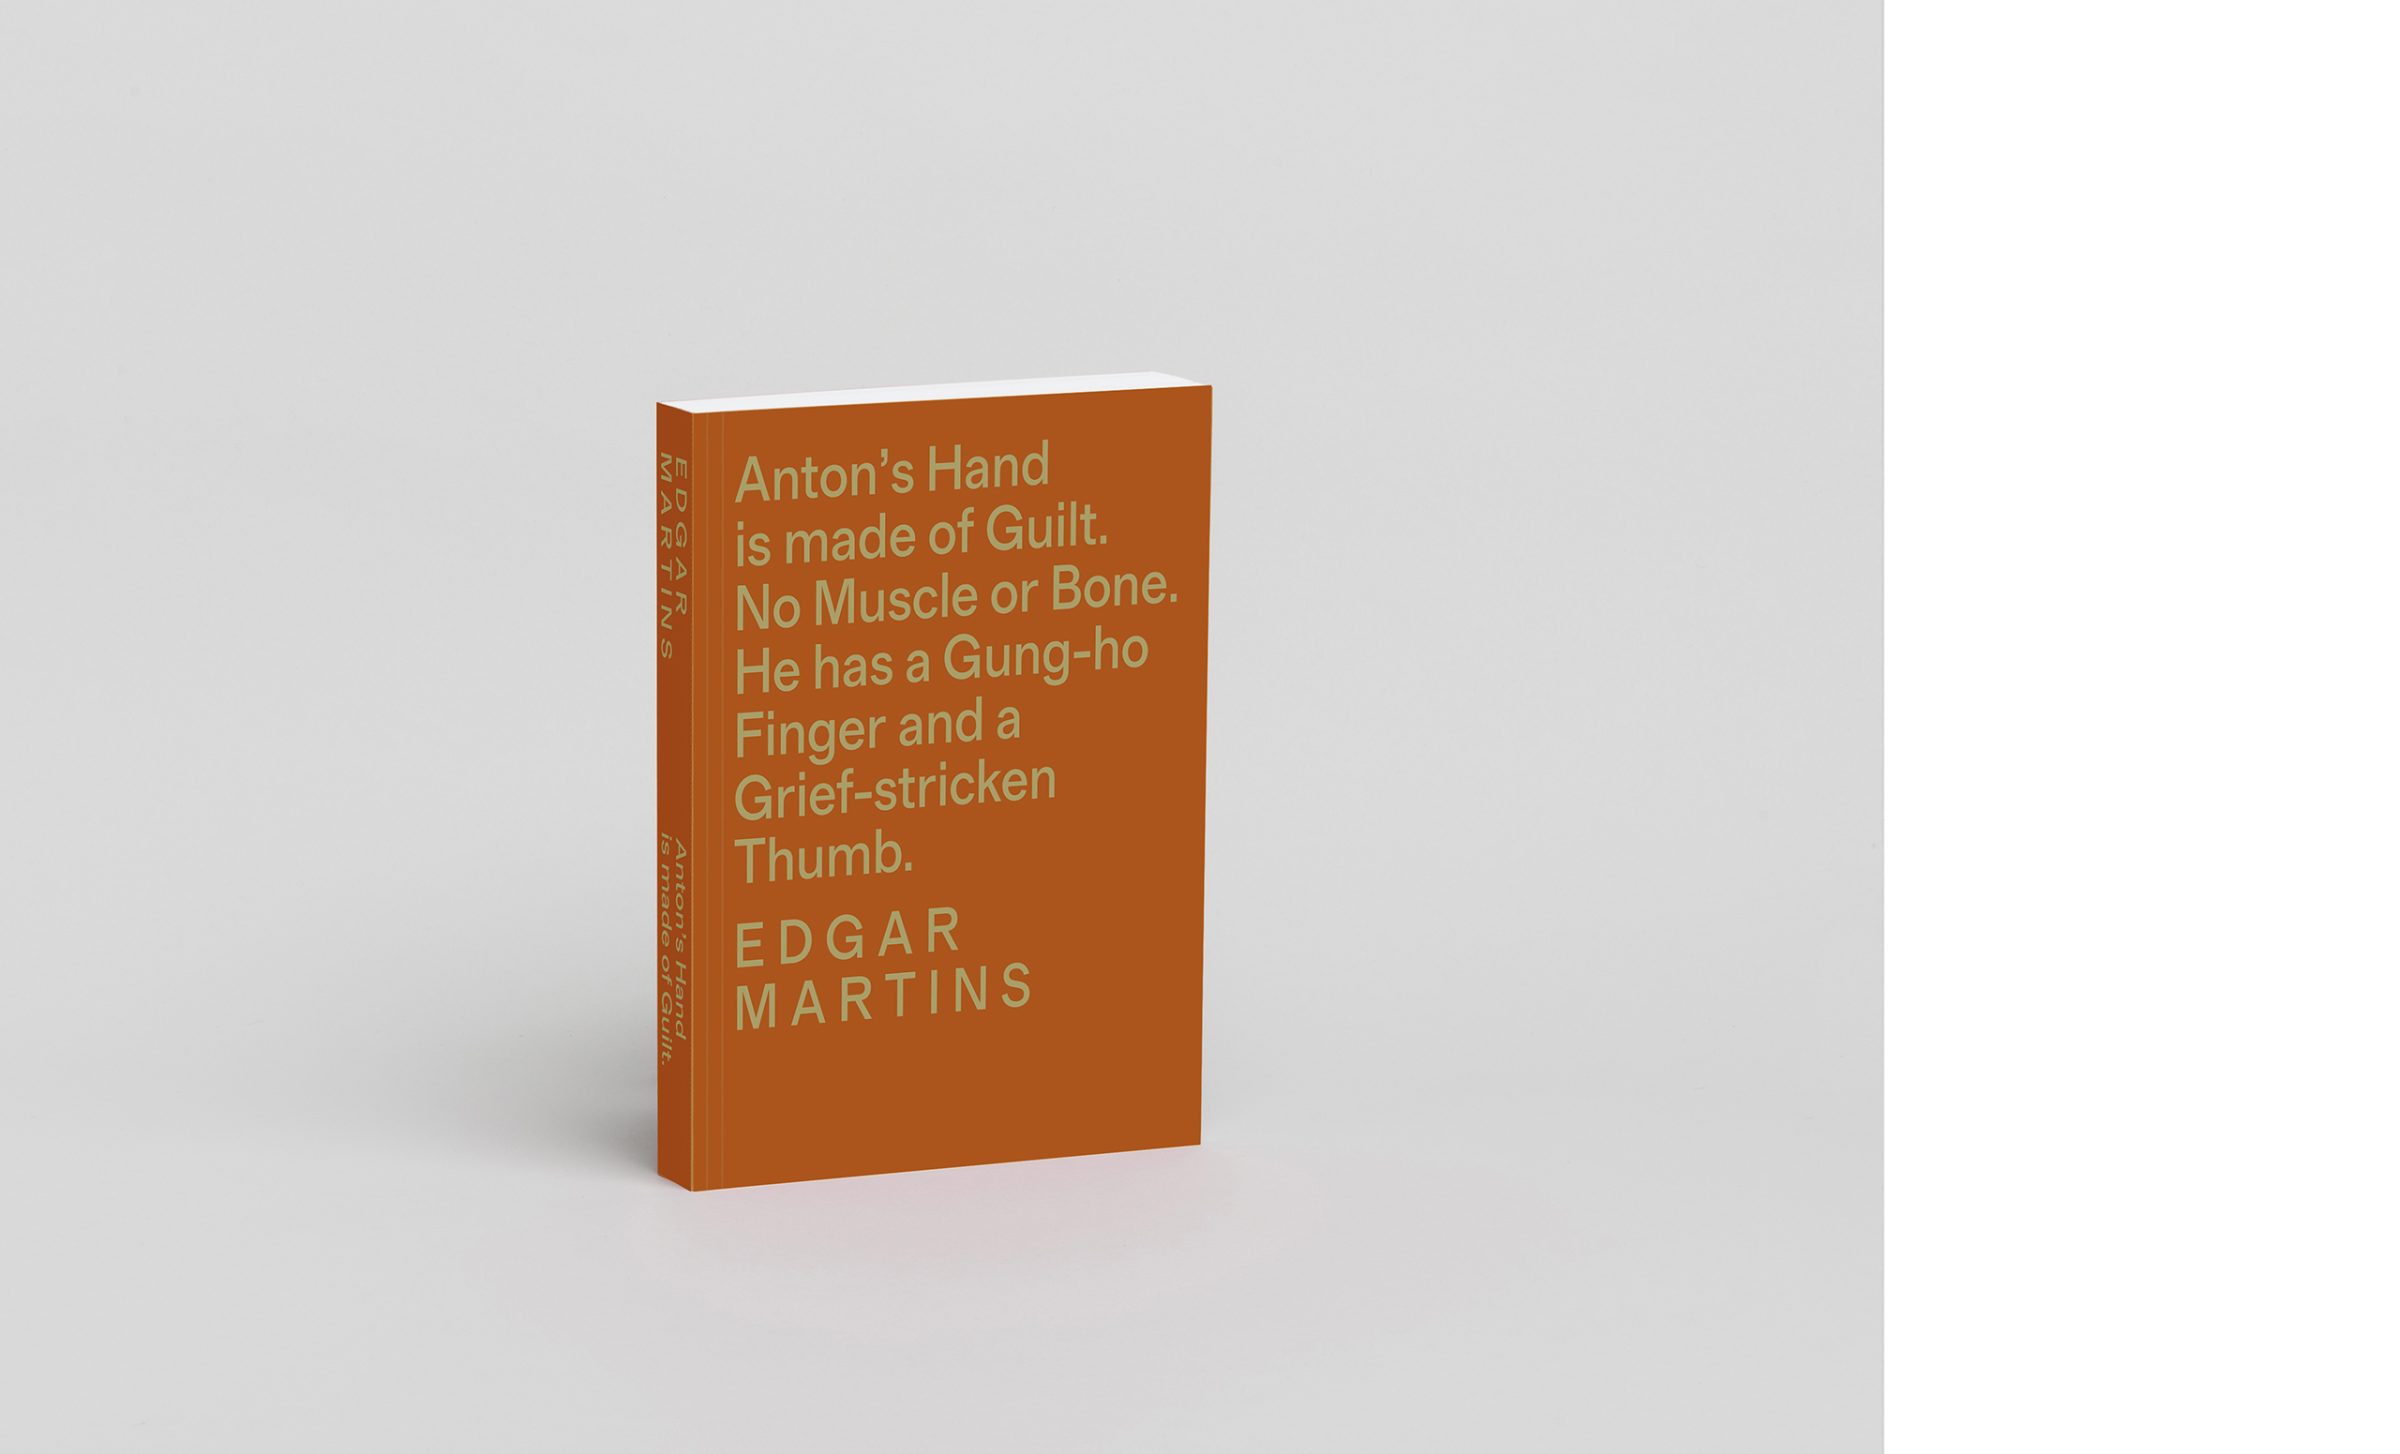 'Anton's Hand is Made of Guilt. No Muscle or Bone. He has a Gung-ho Finger and a Grief-stricken Thumb.' is now available to pre-order